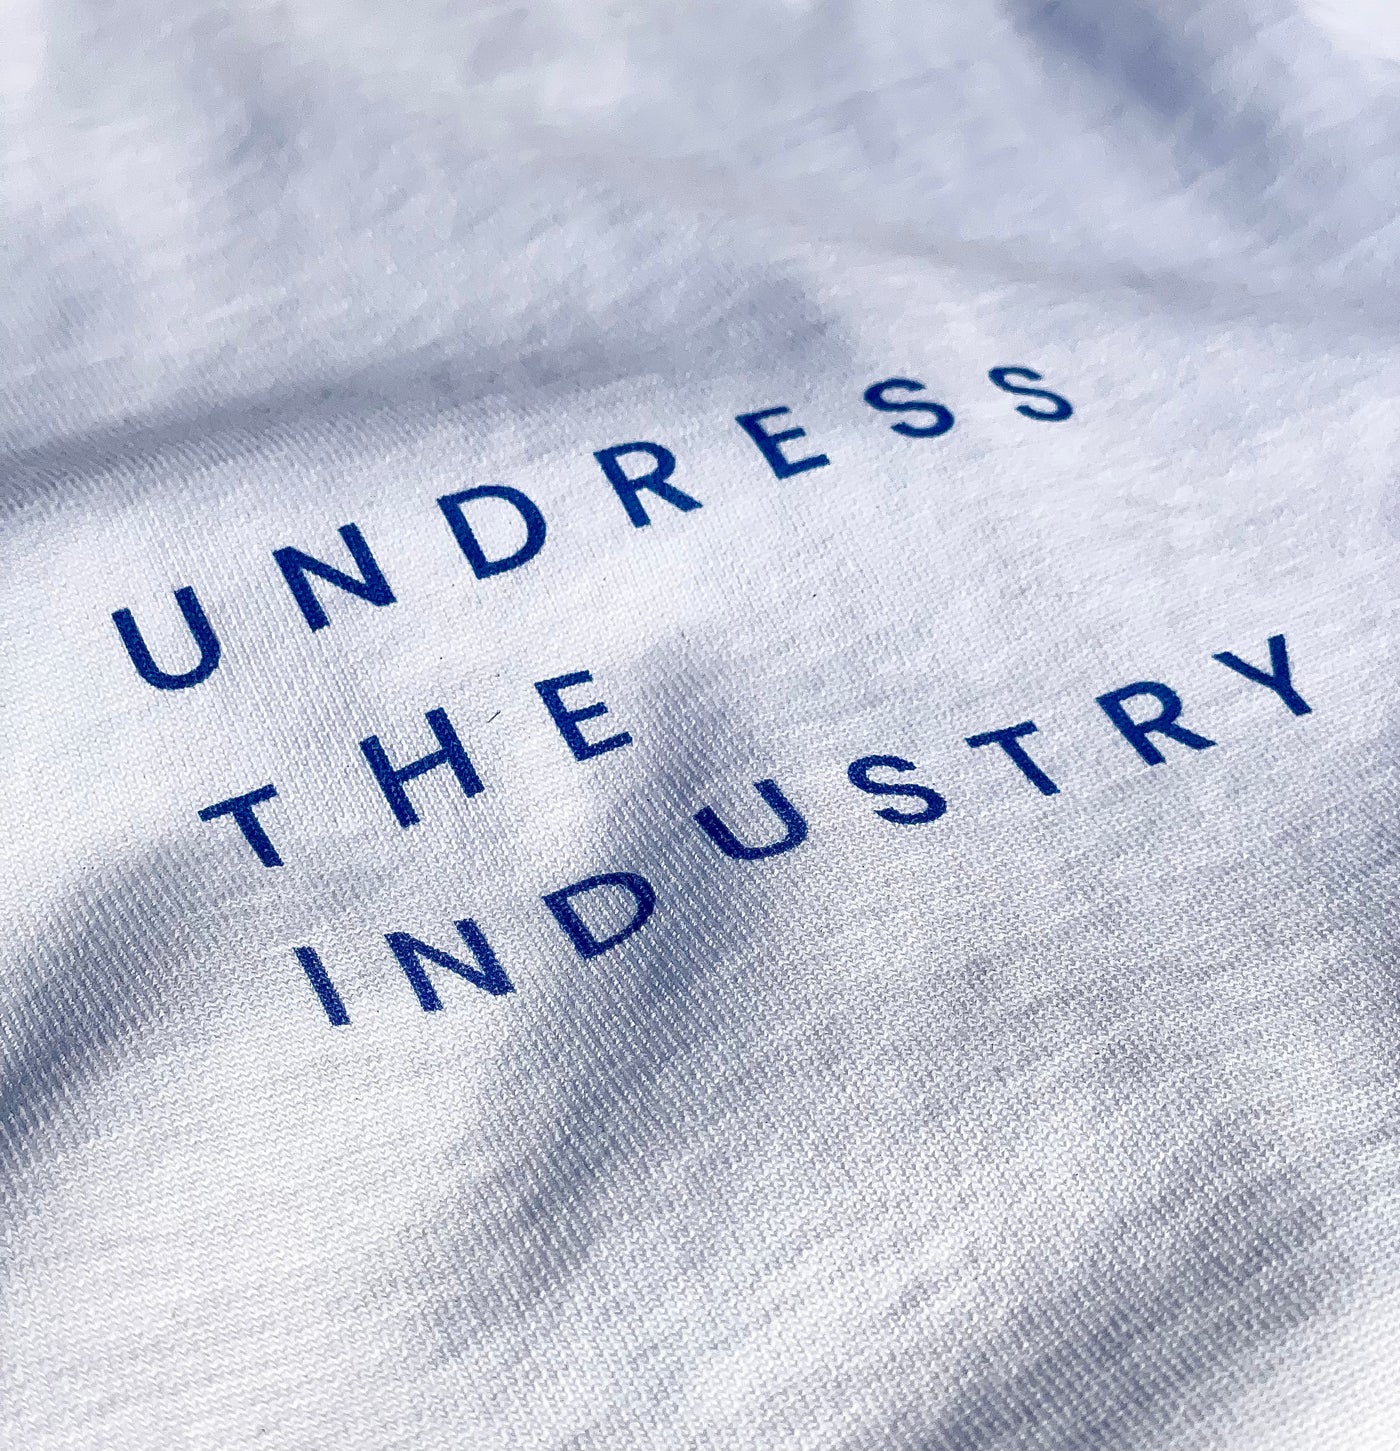 Unrobe | Dressing people by undressing the industry